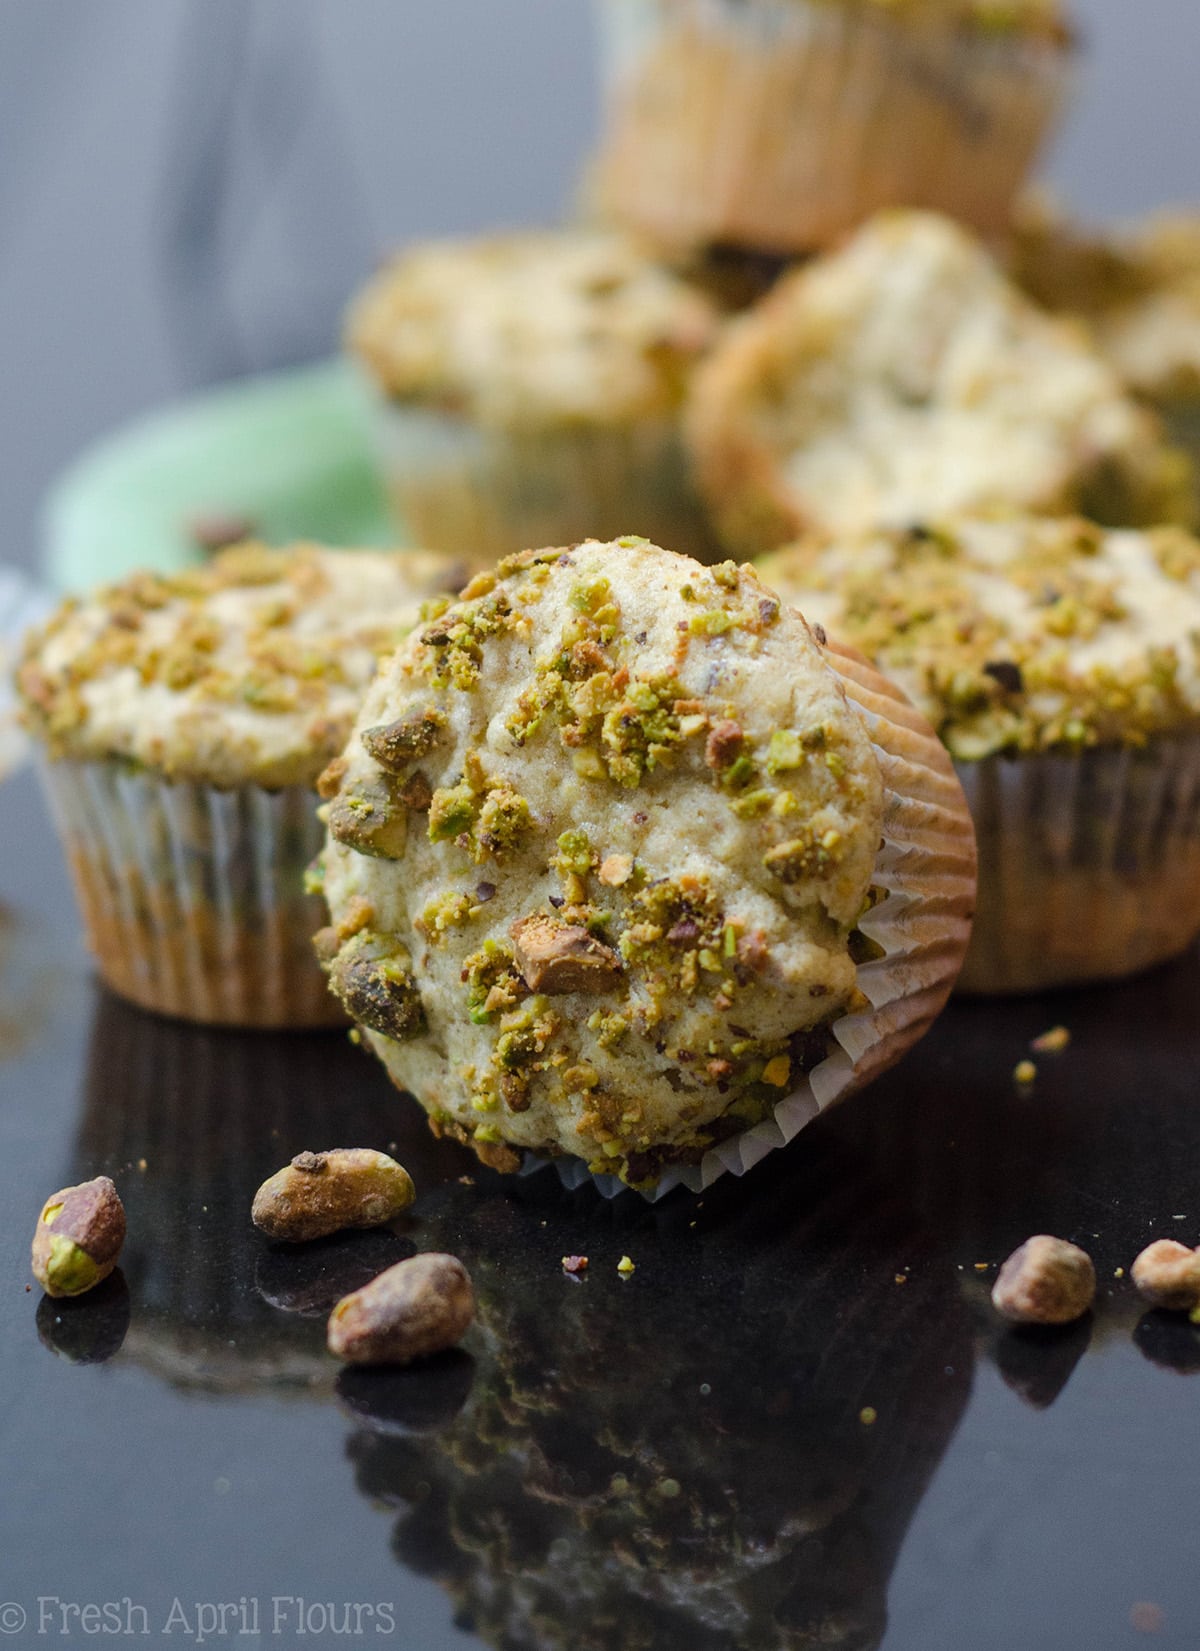 pistachio muffin on its side with muffins behind it